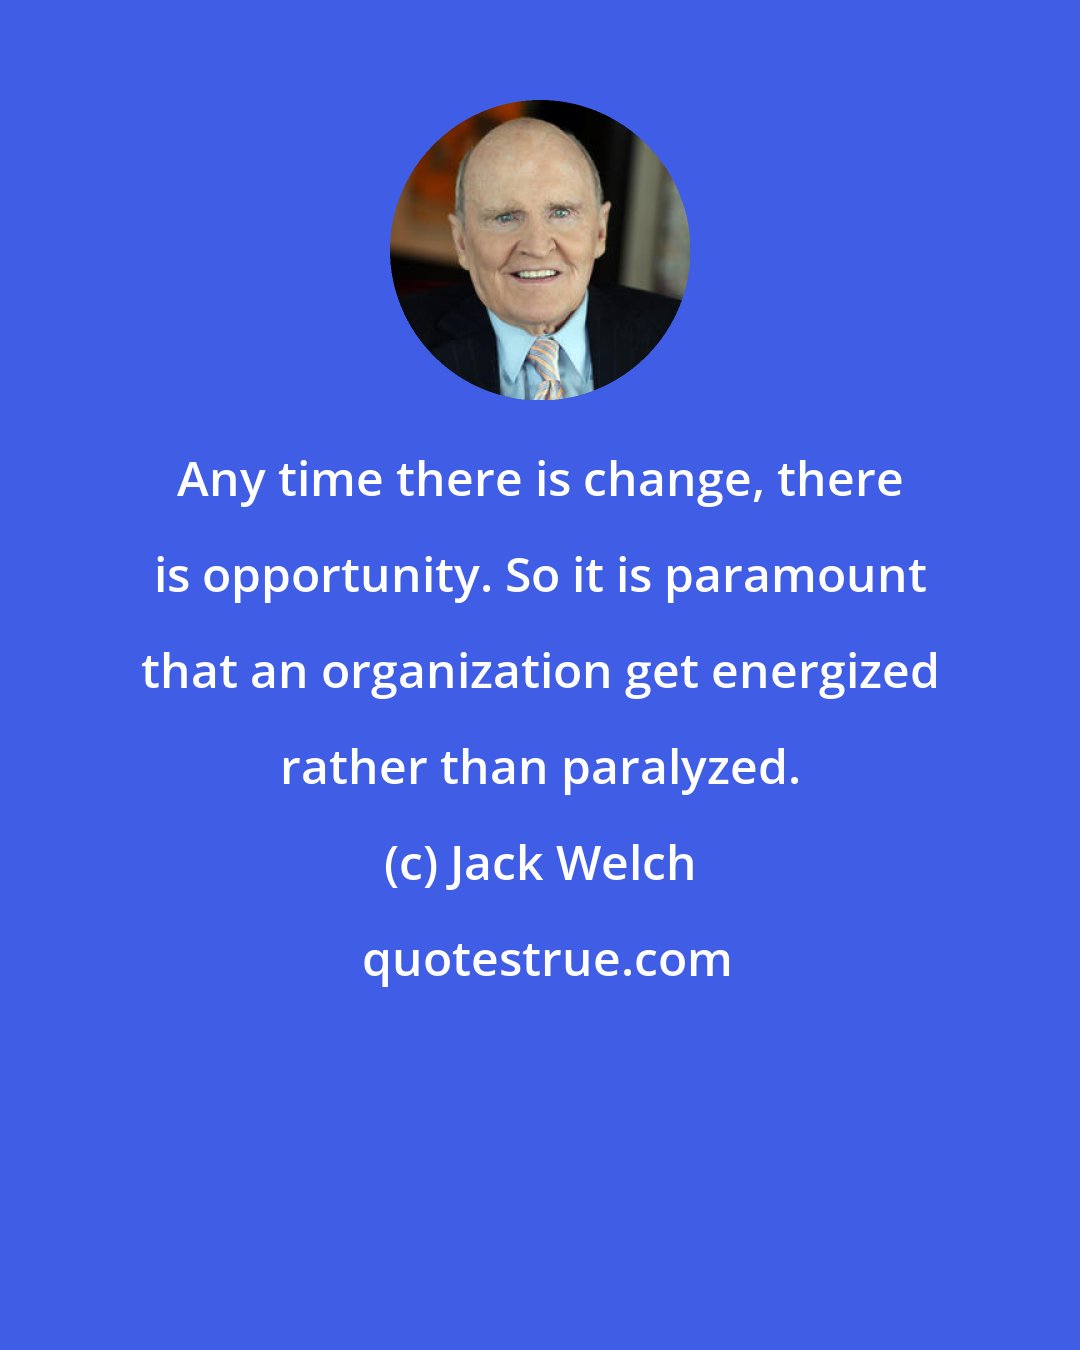 Jack Welch: Any time there is change, there is opportunity. So it is paramount that an organization get energized rather than paralyzed.